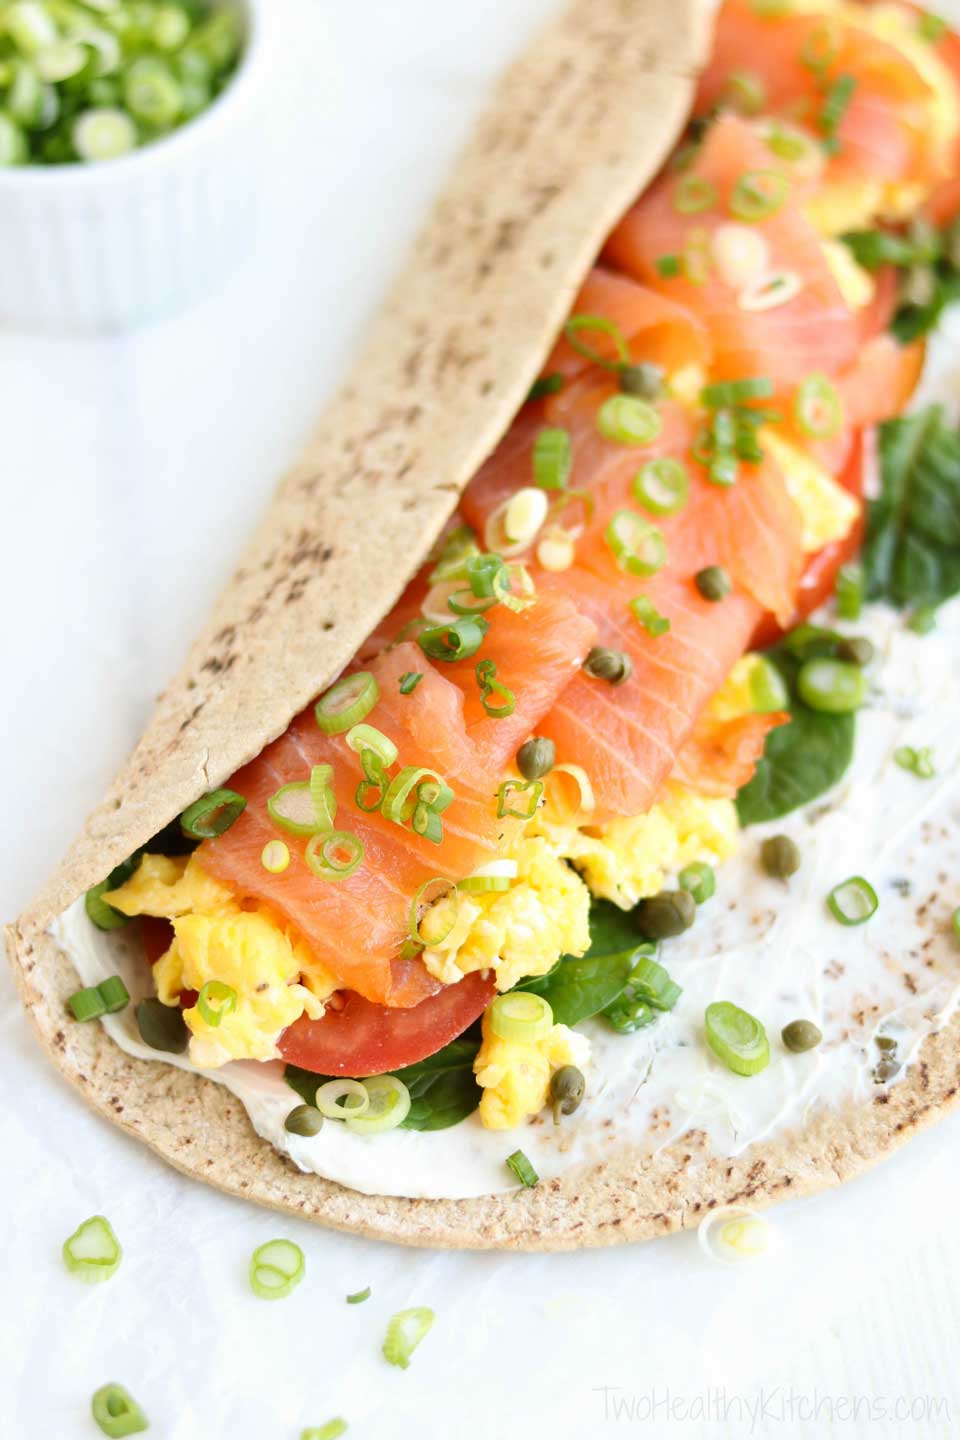 A hearty yet luxurious breakfast that'll have you out the door in just minutes! This Smoked Salmon Breakfast Wrap is such a popular recipe for a reason!